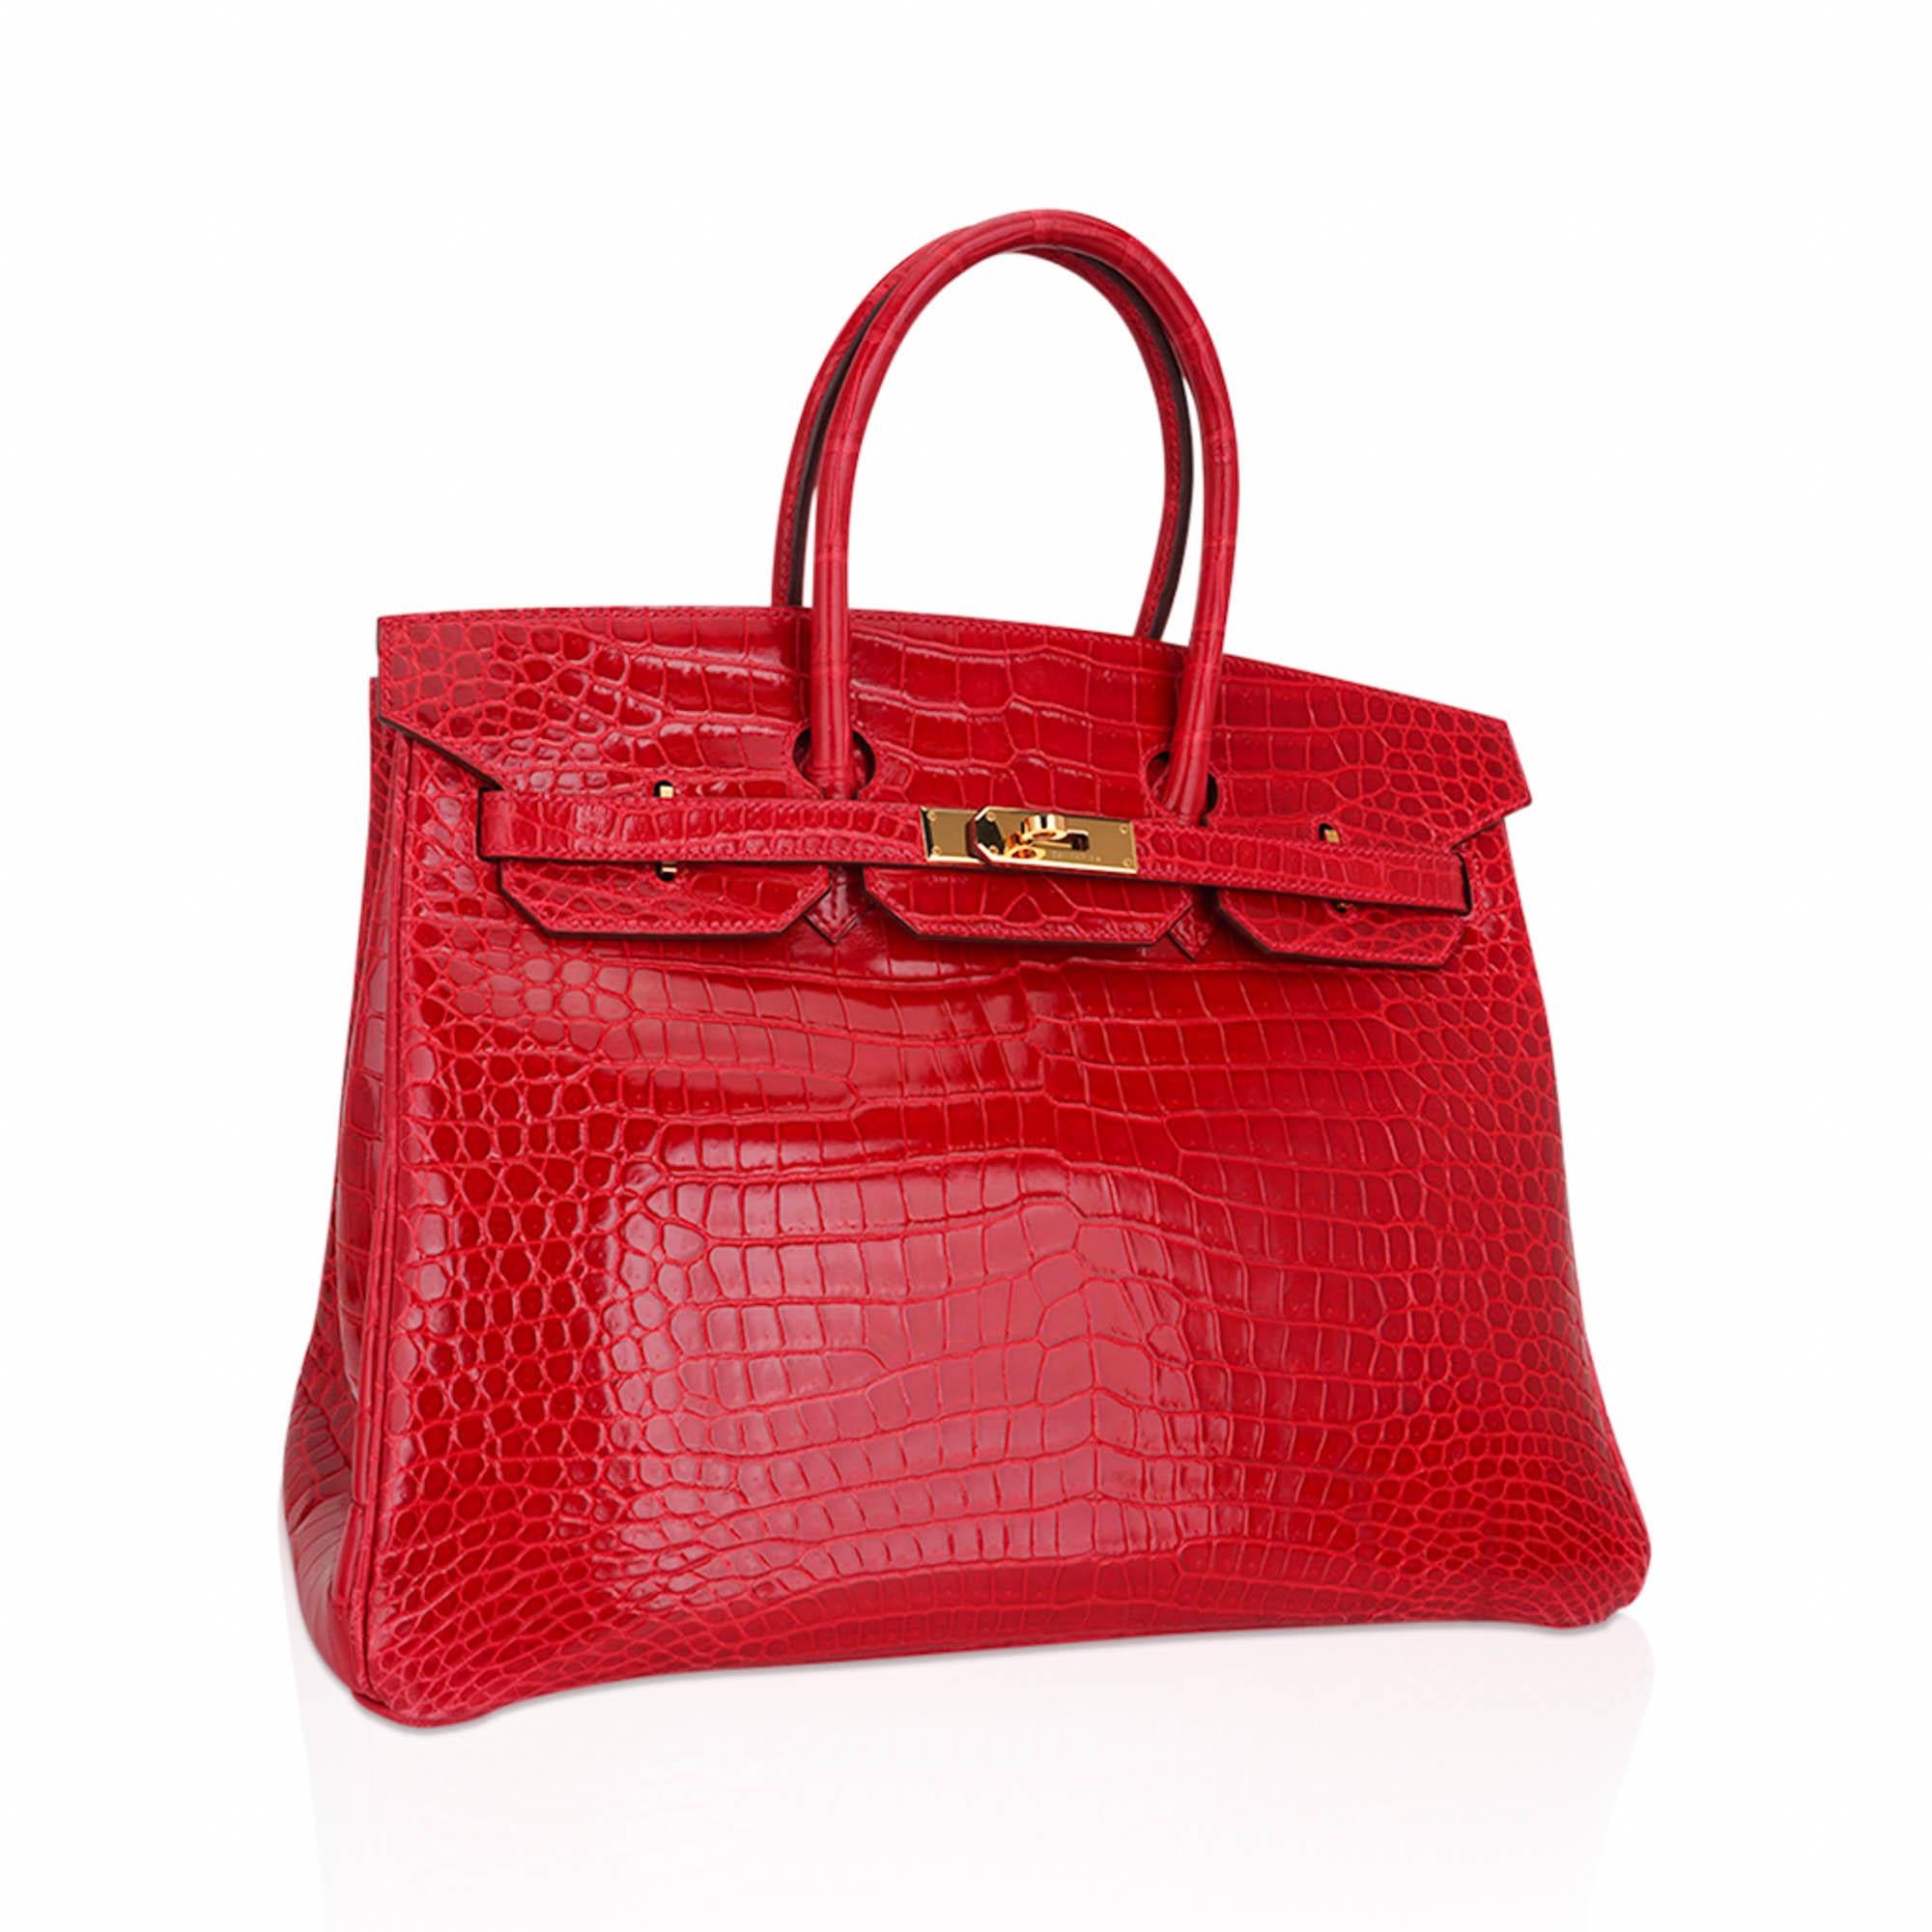 Mightychic offers an Hermes Birkin 35 coveted rare Braise fire engine lipstick red bag.
Porosus Crocodile is the most rare and exclusive Hermes skin.  The most beautiful small scales.
Rarely produced this exquisite Hermes red crocodile Birkin bag is